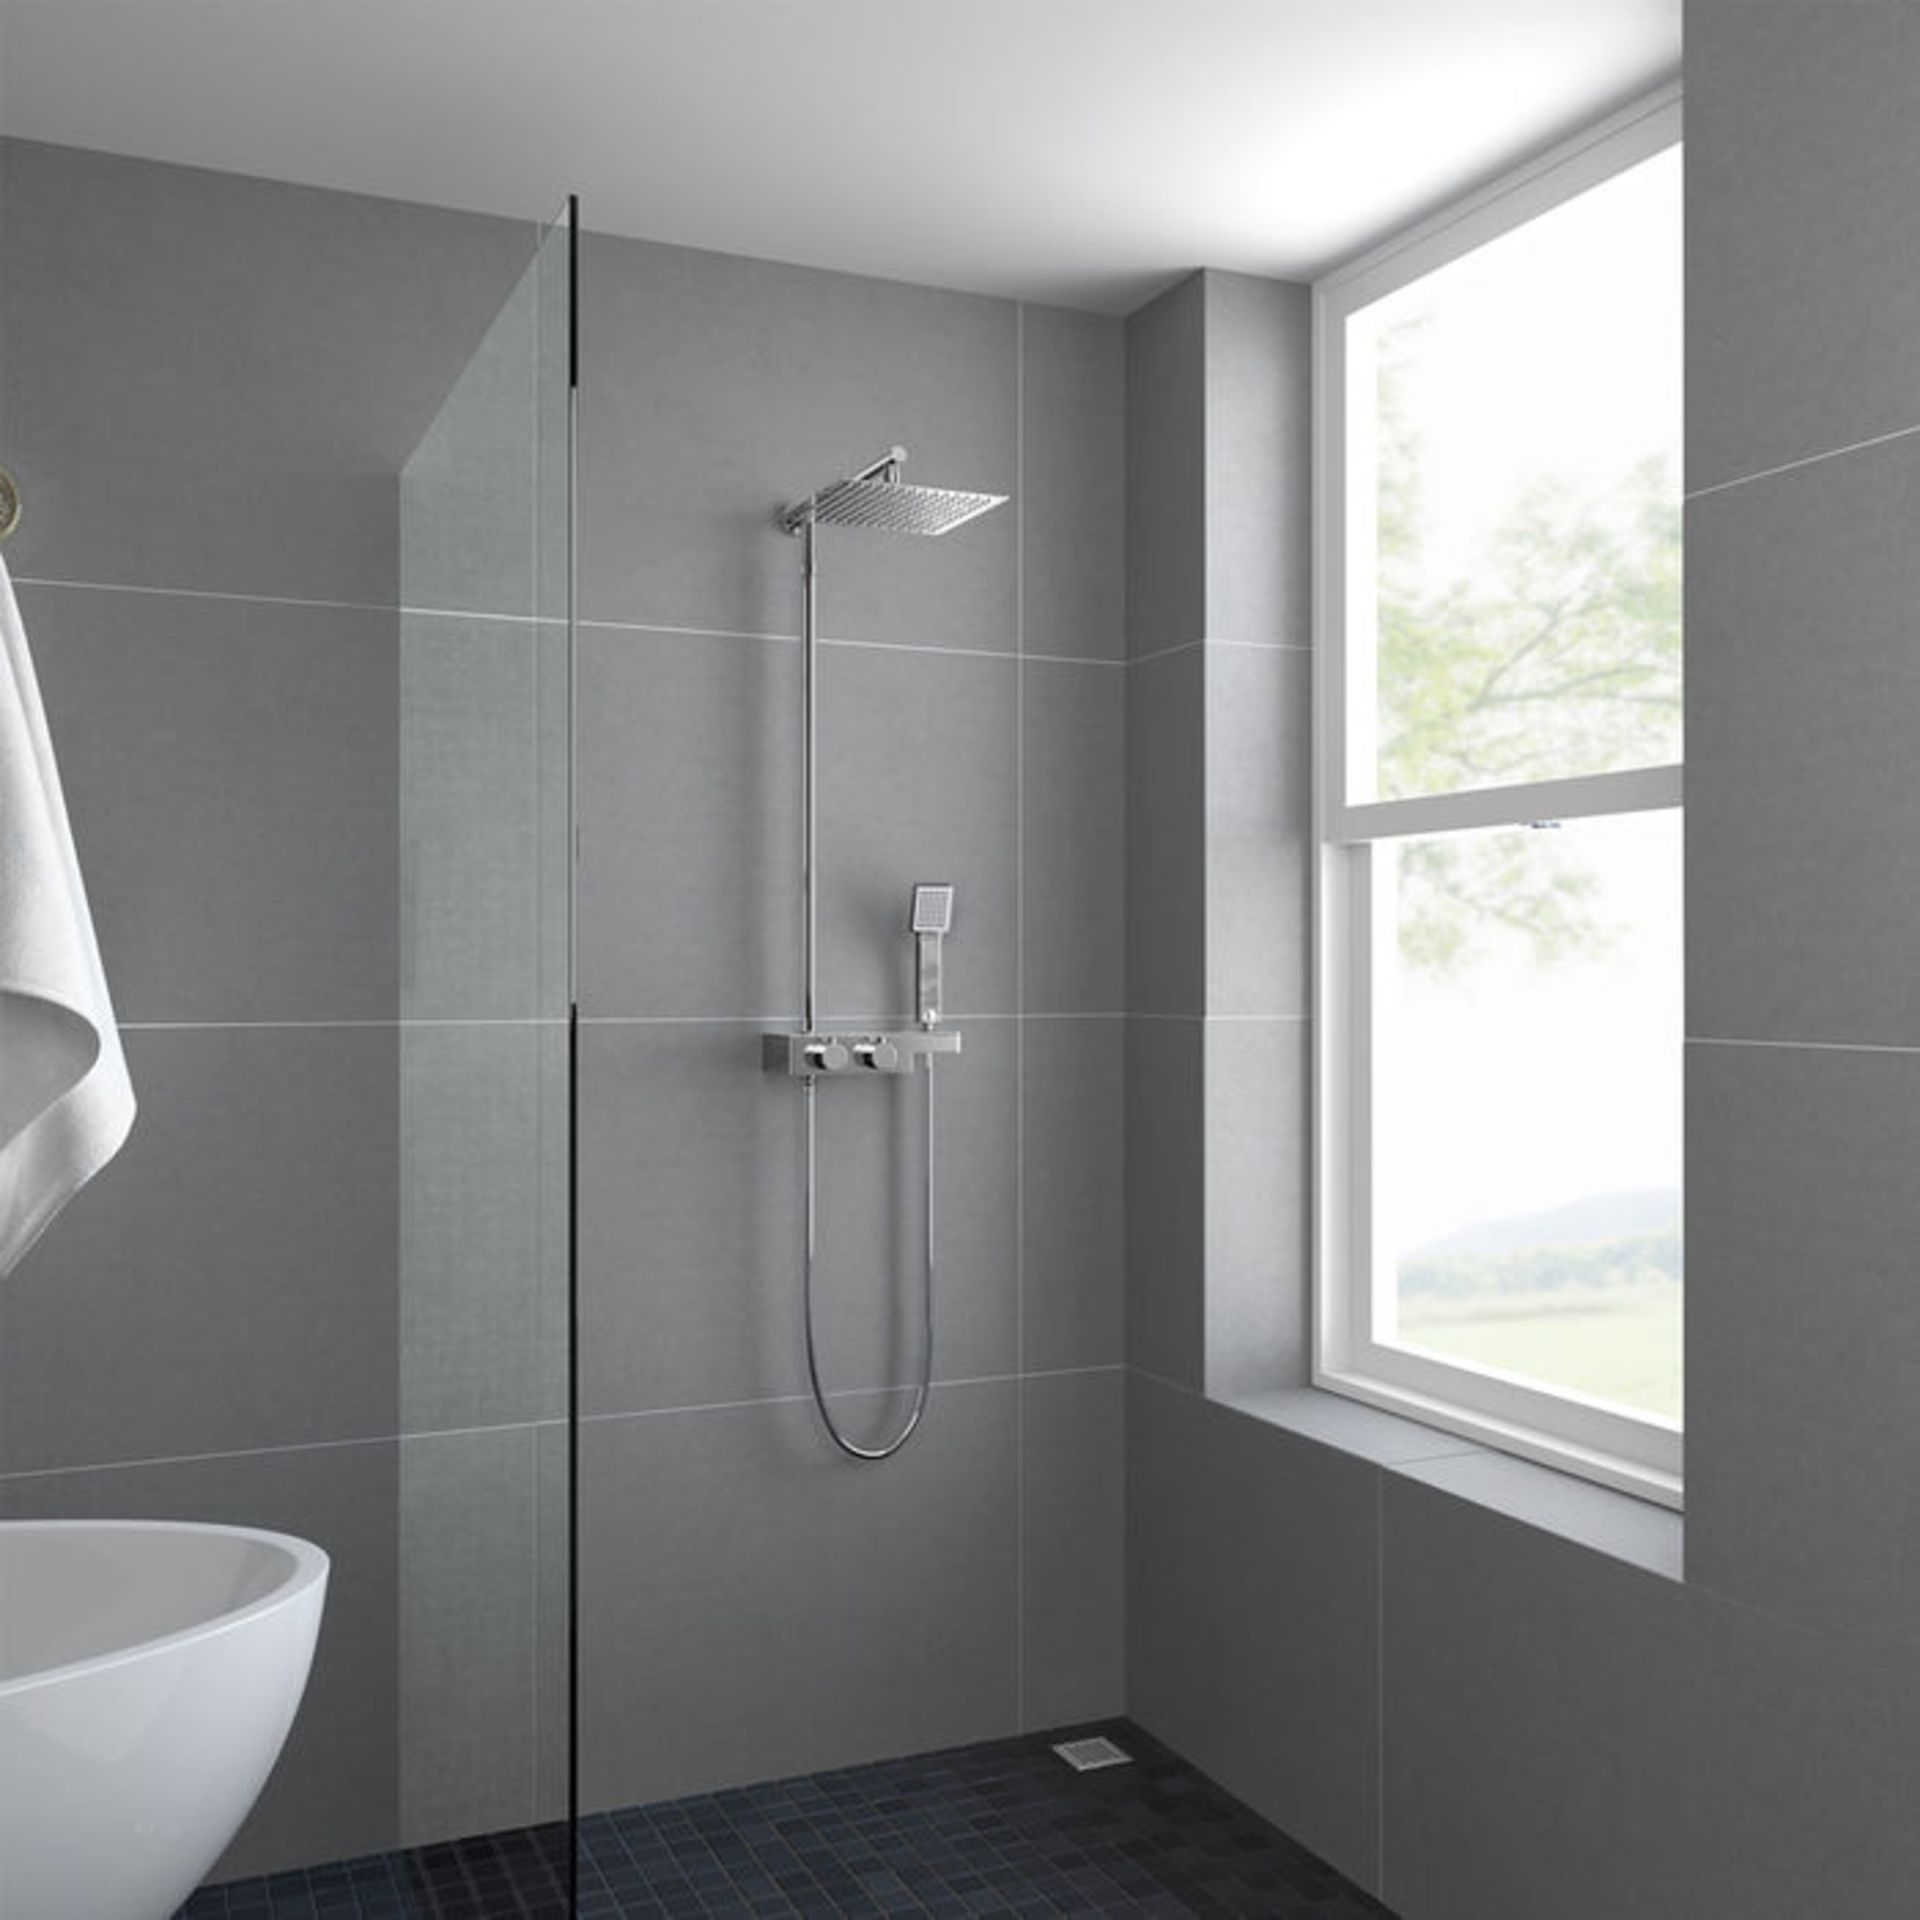 (PP36) Square Exposed Thermostatic Shower Shelf, Kit & Large Head. RRP £349.99. Style meets fu... - Image 4 of 4